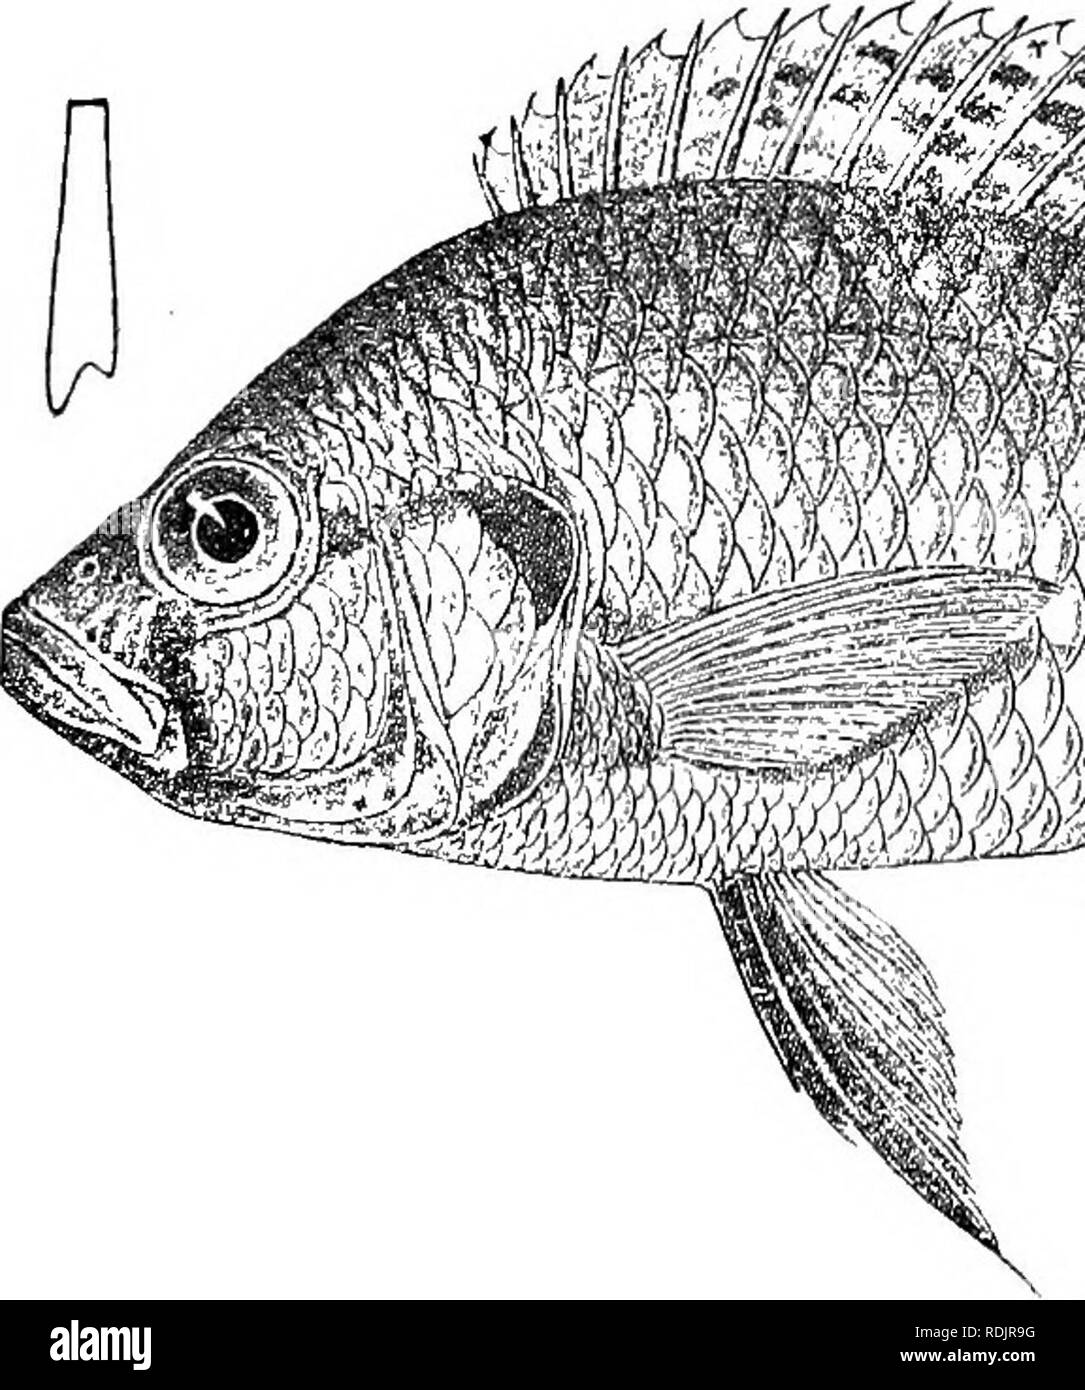 . Catalogue of the fresh-water fishes of Africa in the British museum (Natural history) ... Fishes; Freshwater animals. TILAPIA. 217 5]. TILAPIA BURTONI. Chromis burtord, Guiith. Proc. Zool. Soc. 1893, p. 631, pi. Iviii. fig. C. Tilapia burtoni, Bouleng. Tr. Zool. Soc. xv. 1898, p. .5, Proc. Zool. Soc. 1899, p. 127, and Poiss. Bass. Congo, p. 460 (1901) ; Pellegr. Mem. Soc. Zool. France, xvi. 1904, p. 320. Depth of body 2^ to 21 times in total length, length of head 2f to S} times. Head 2 to 2| times as long as broad; snout with straight or slightly concave upper profile, as long as or a littl Stock Photo